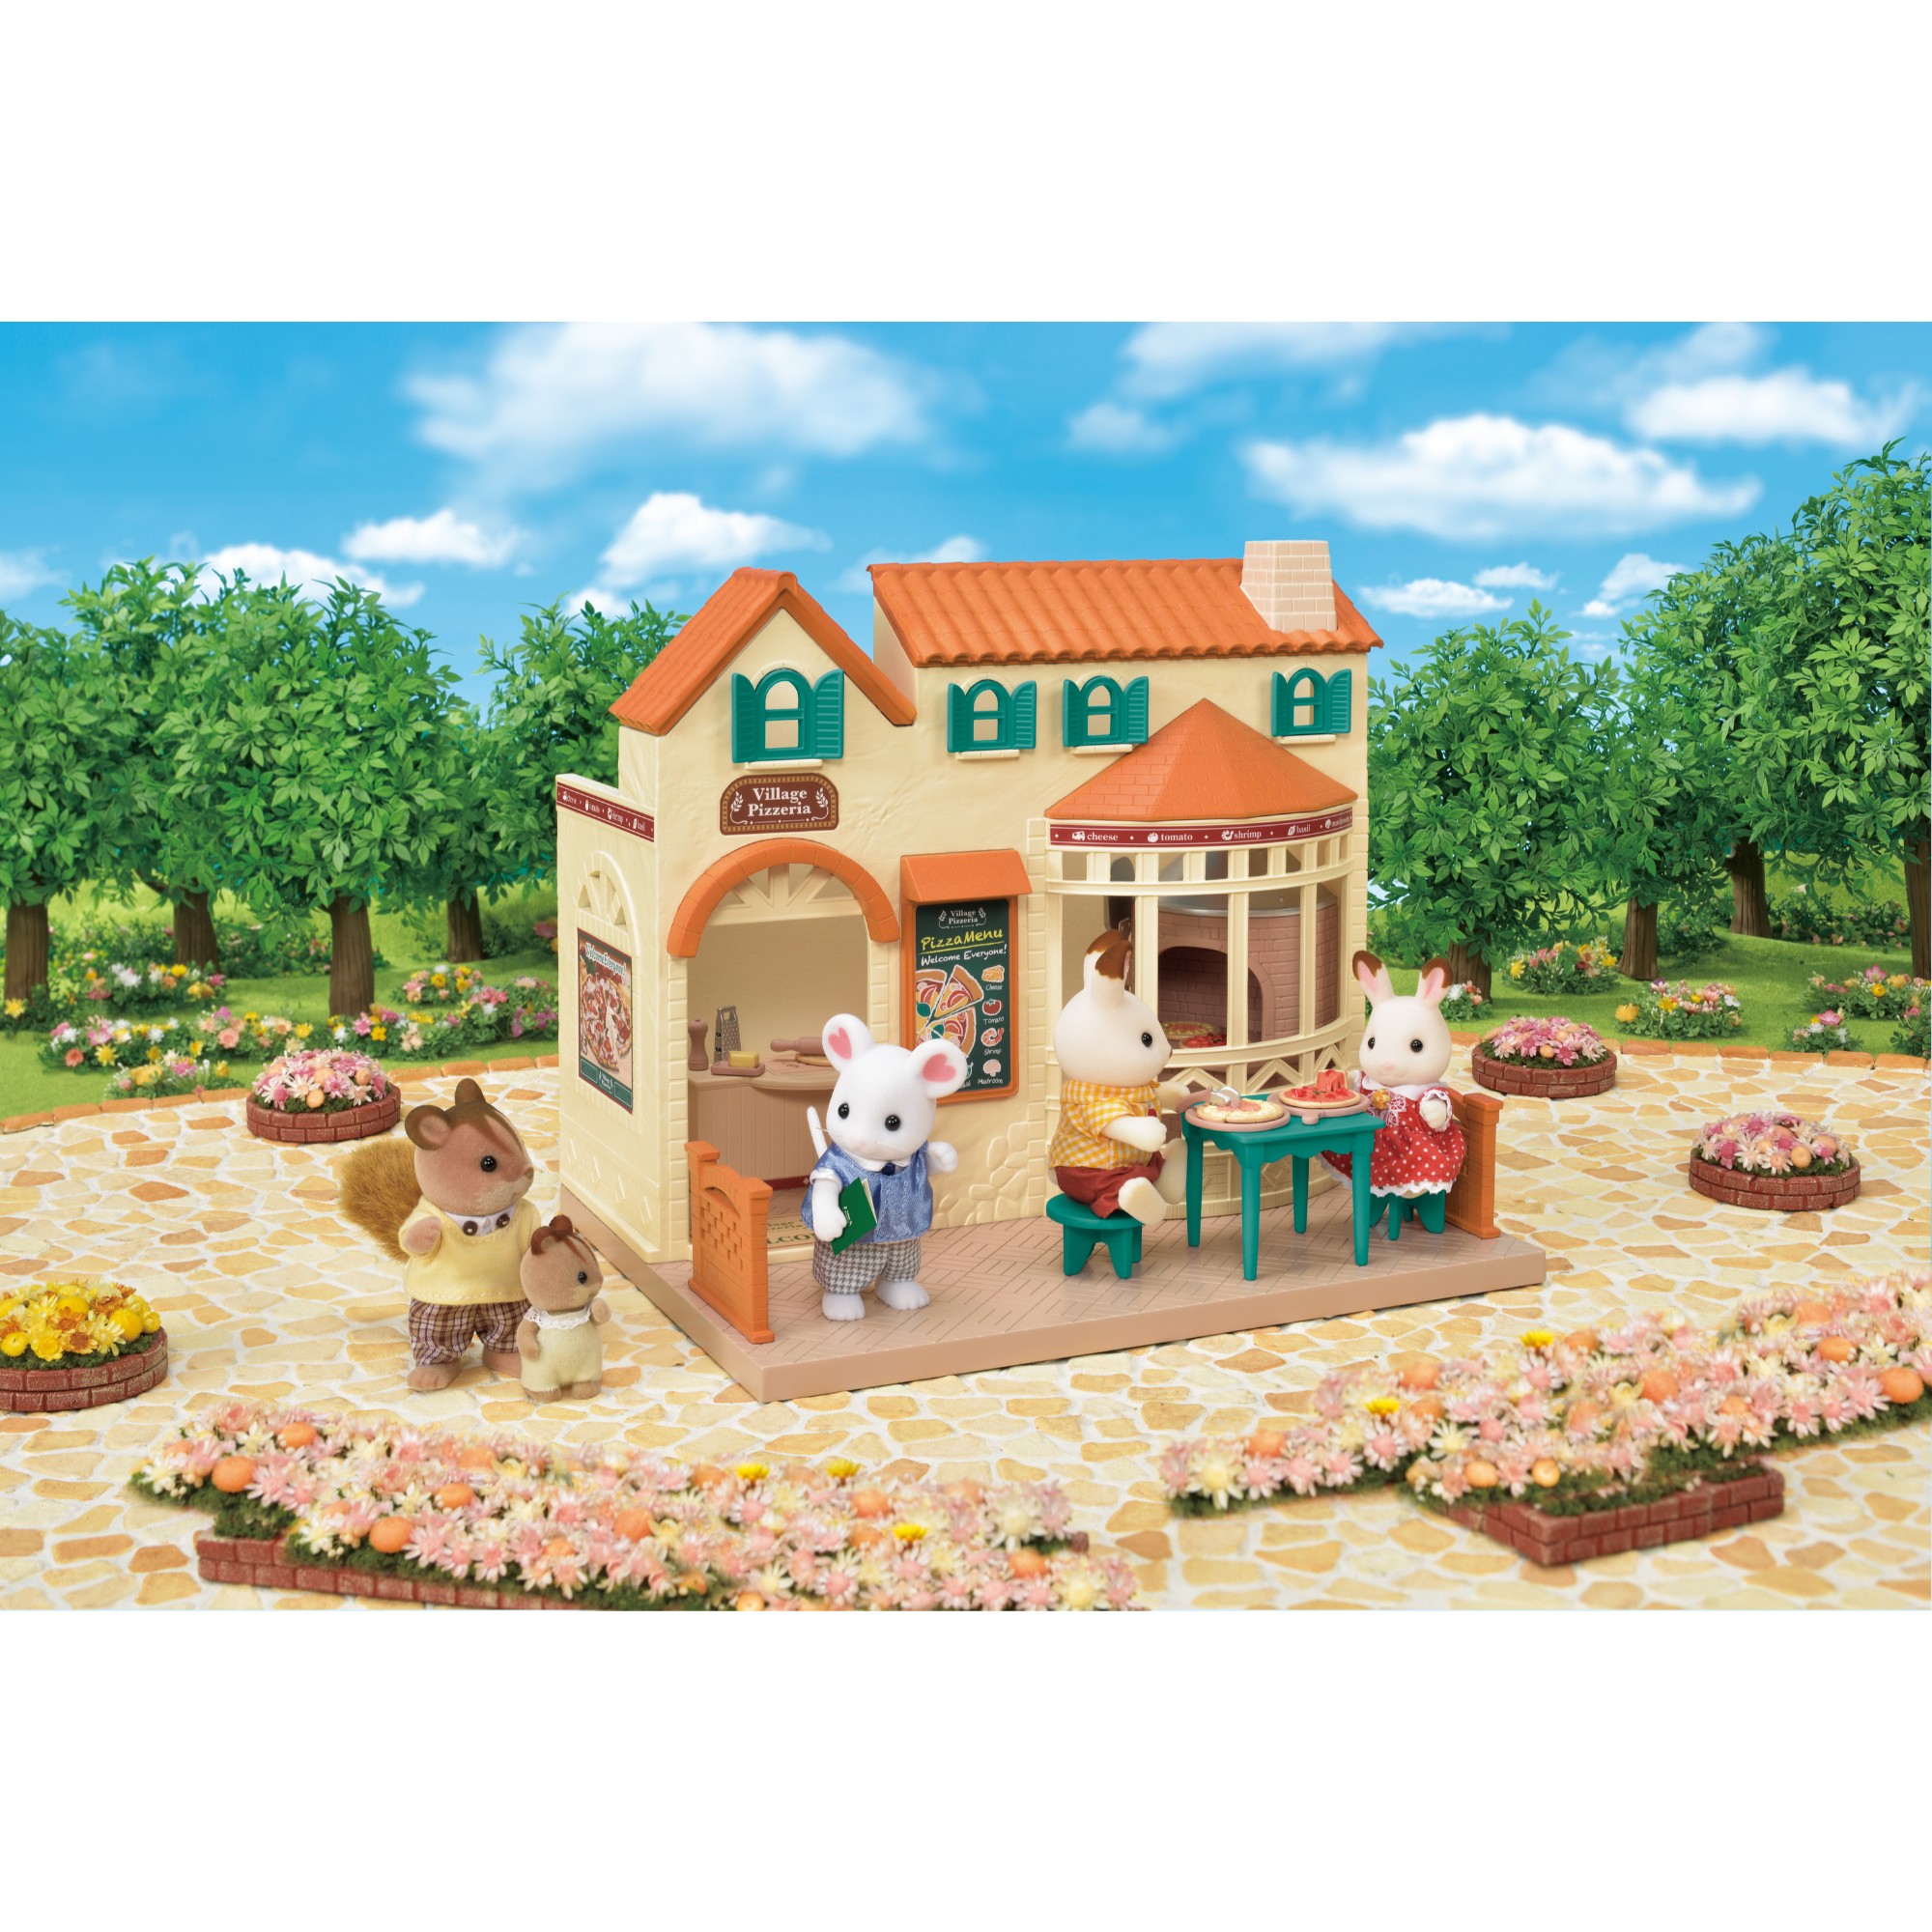 Calico Critters Village Pizzeria Dollhouse Playset, Collectible Dollhouse Toy with Furniture and Accessories Included - image 3 of 3